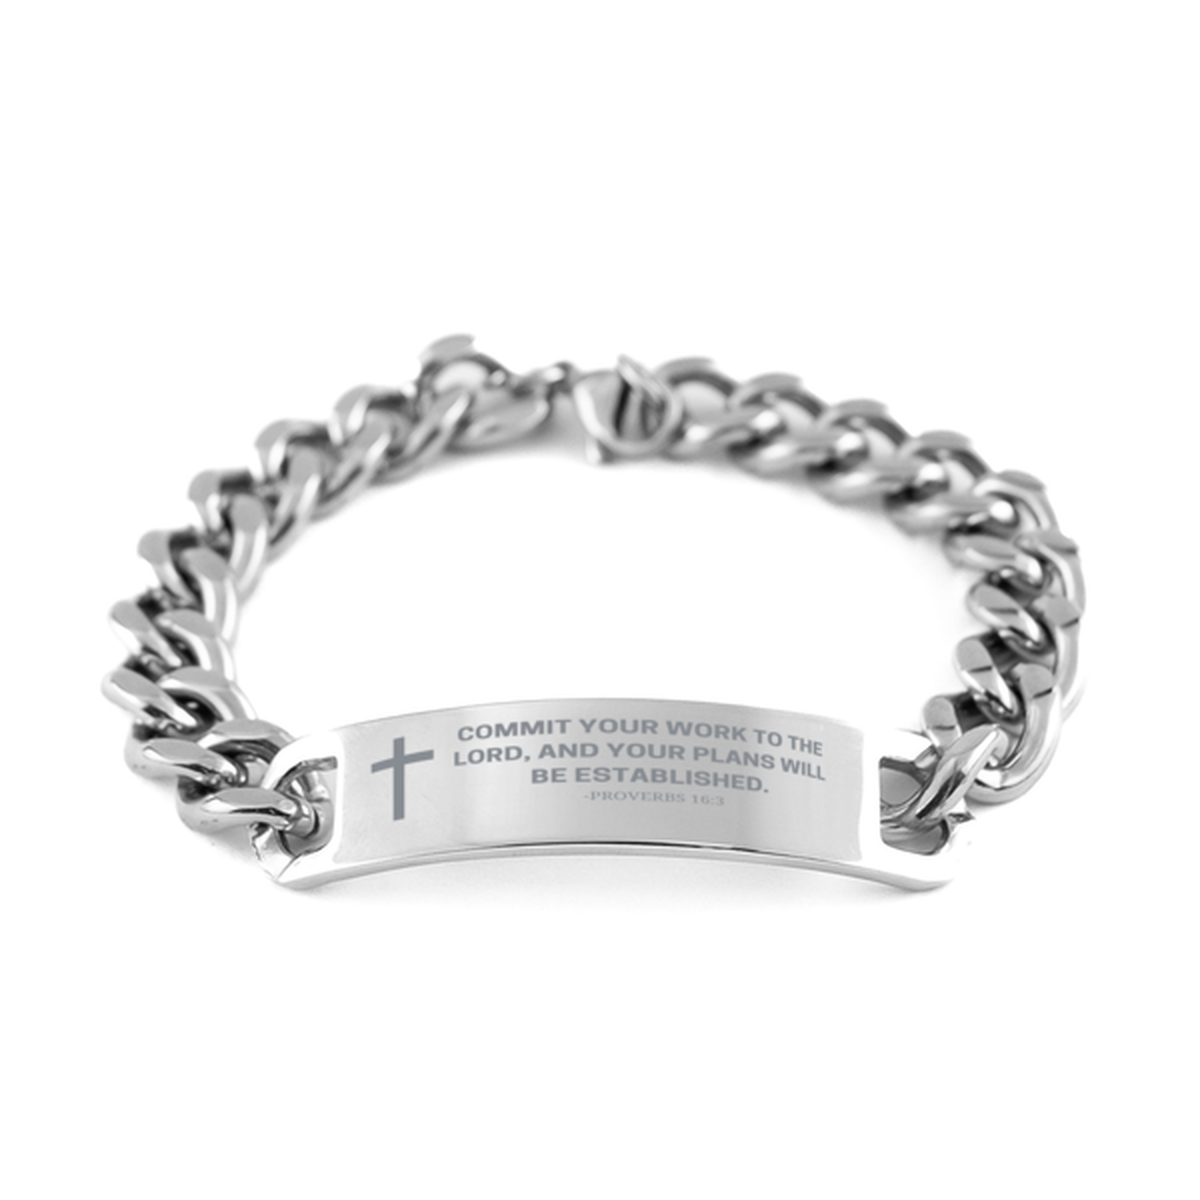 Baptism Gifts For Teenage Boys Girls, Christian Bible Verse Cuban Chain Bracelet, Commit your work to the Lord, Catholic Confirmation Gifts for Son, Godson, Grandson, Nephew